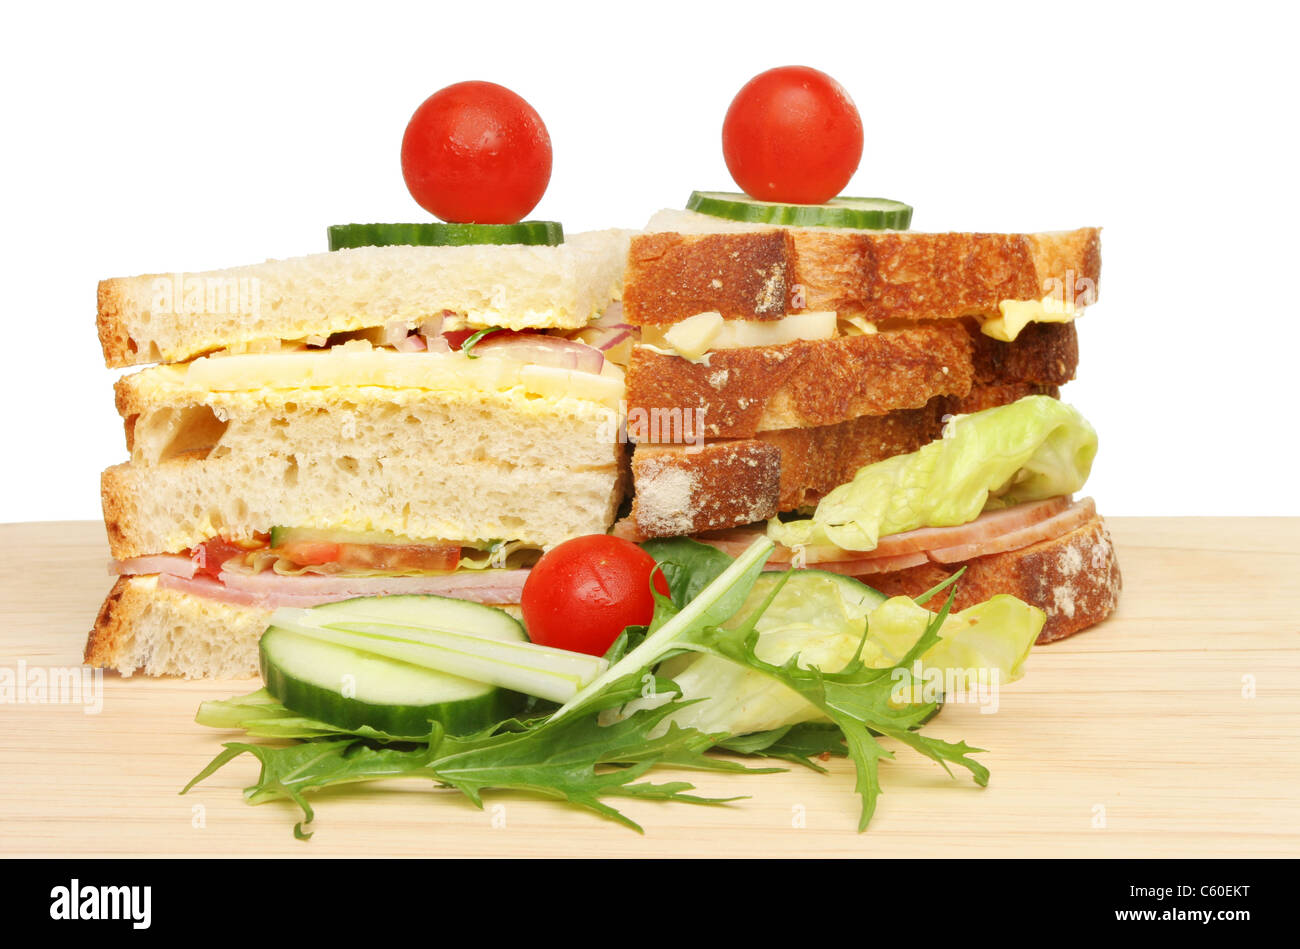 Club sandwich with salad on a wooden board Stock Photo